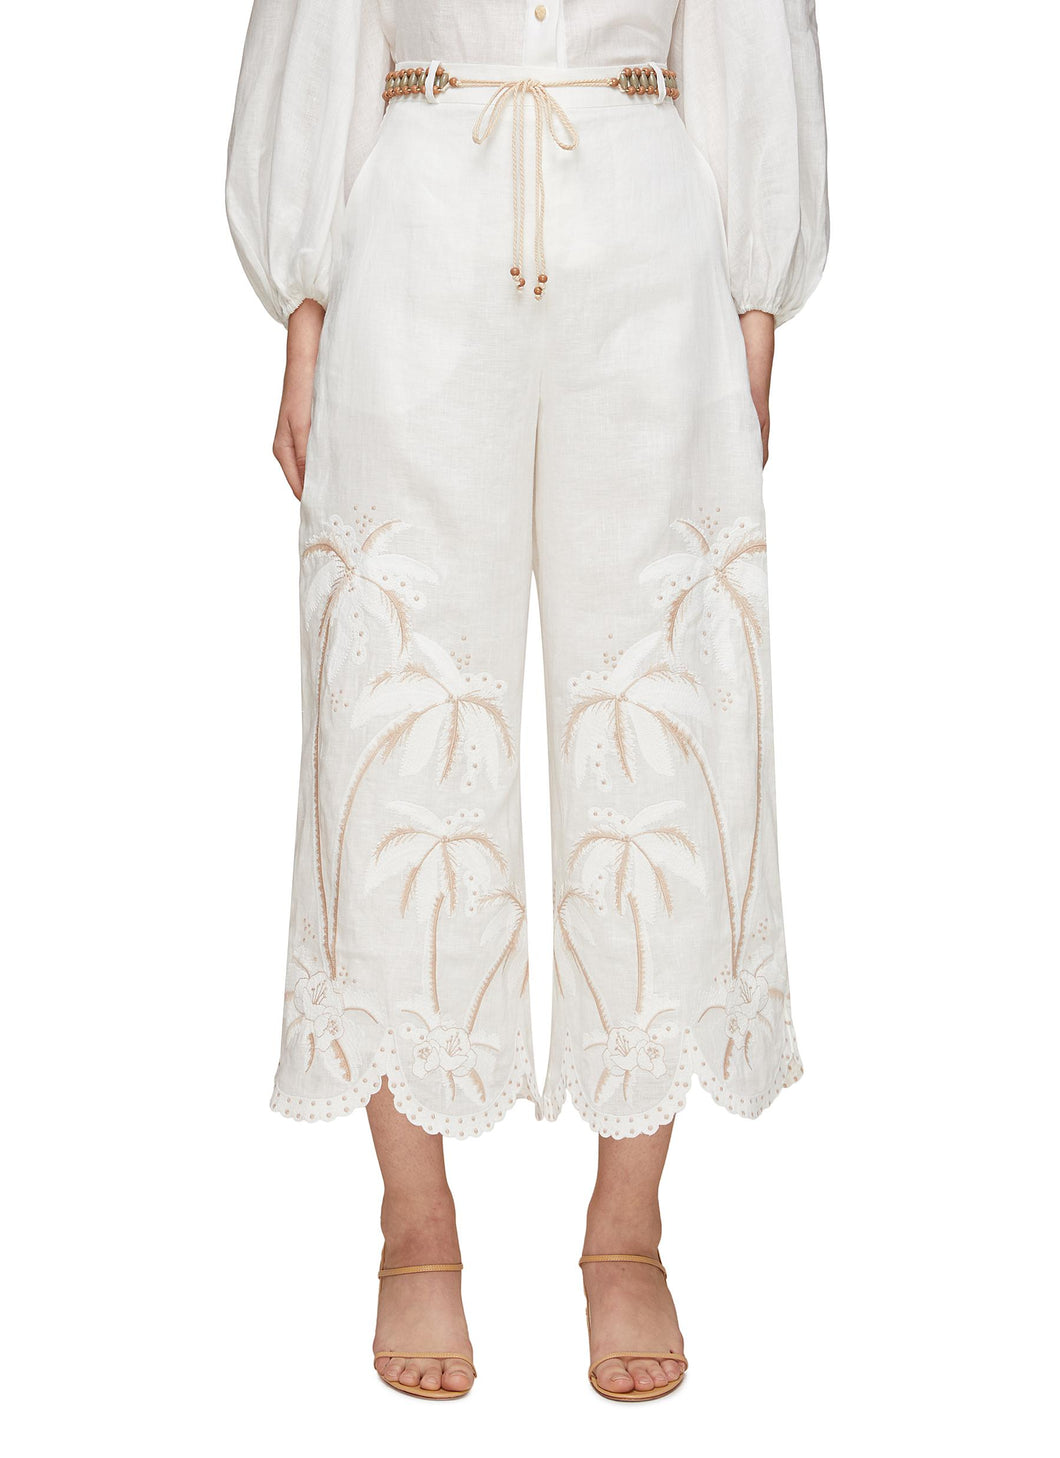 ‘LYRE’ BELTED PALM TREE EMBROIDERY LINEN PANTS